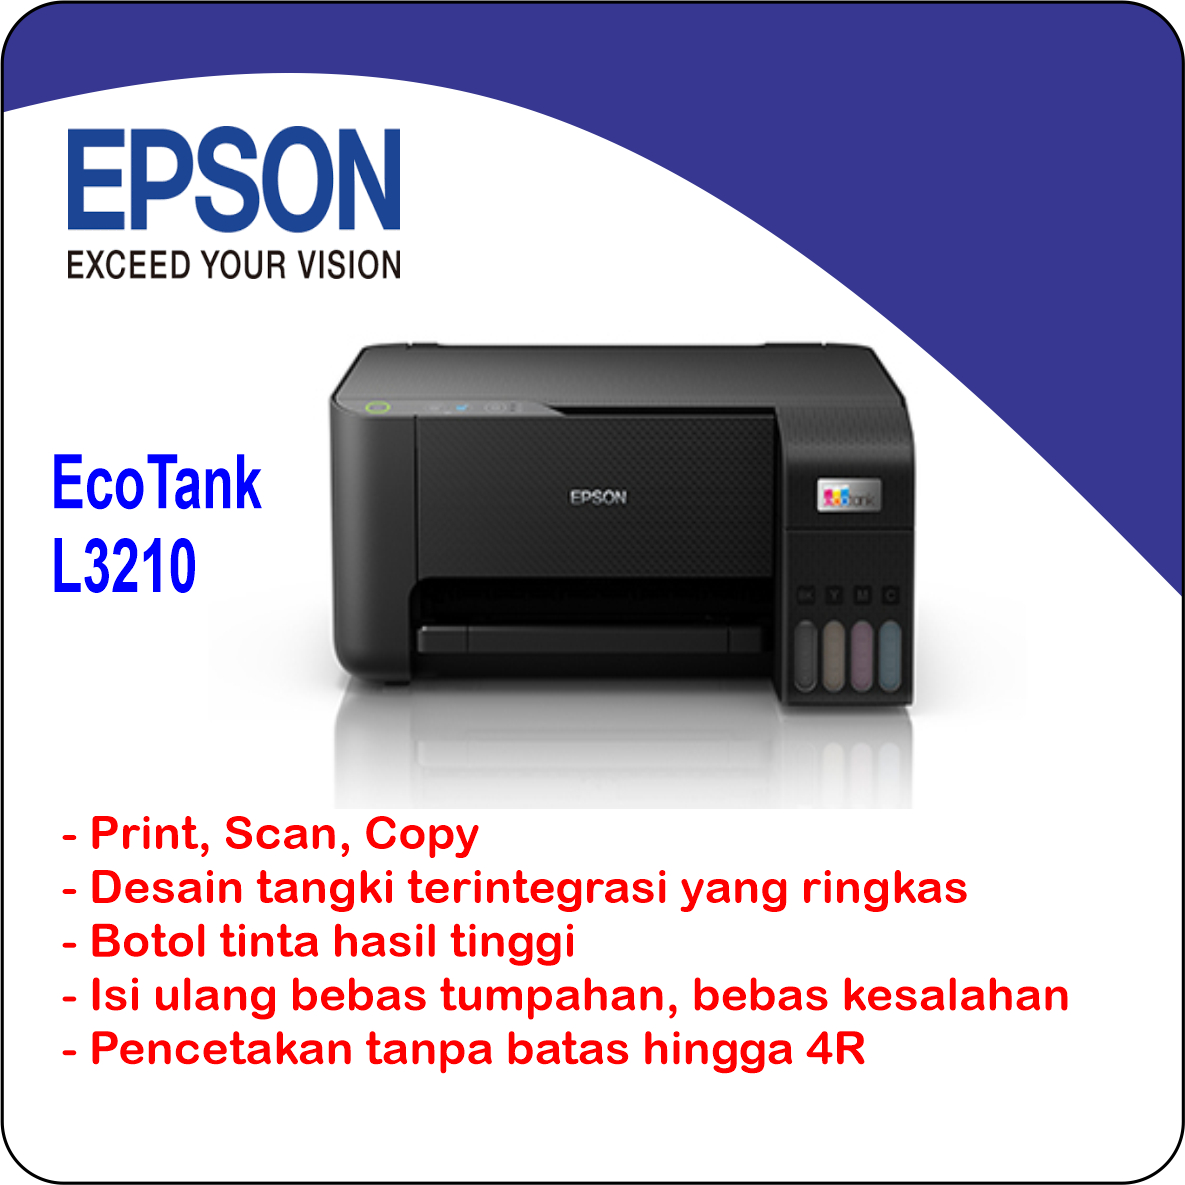 Epson Ecotank L3210 A4 All In One Ink Tank Printer Siplah 0537